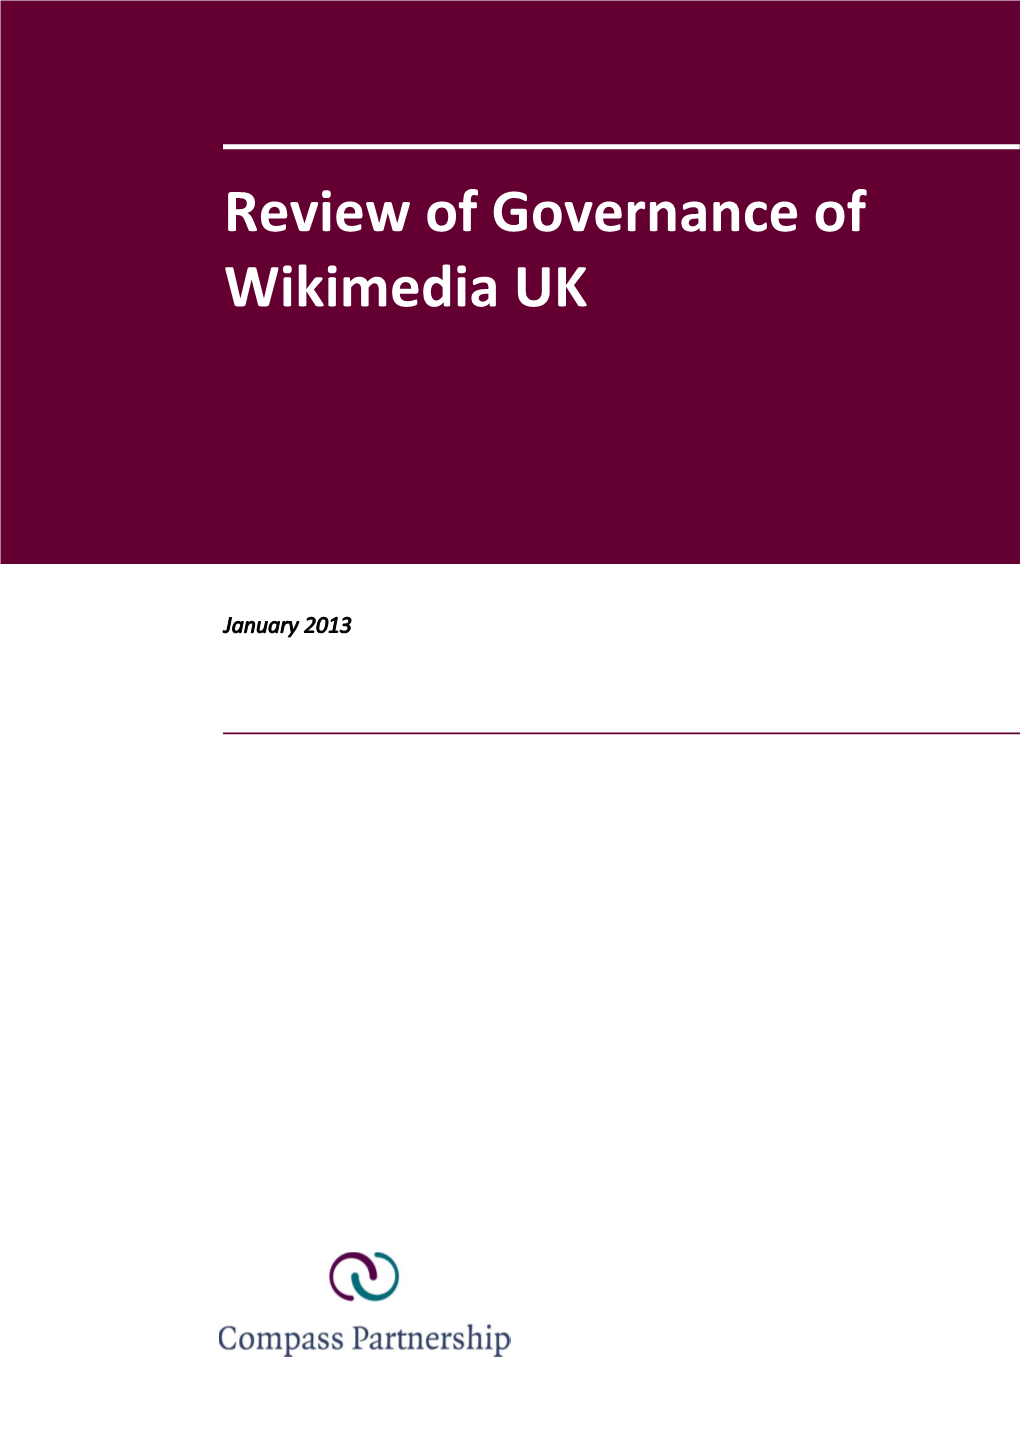 Review of Governance of Wikimedia UK